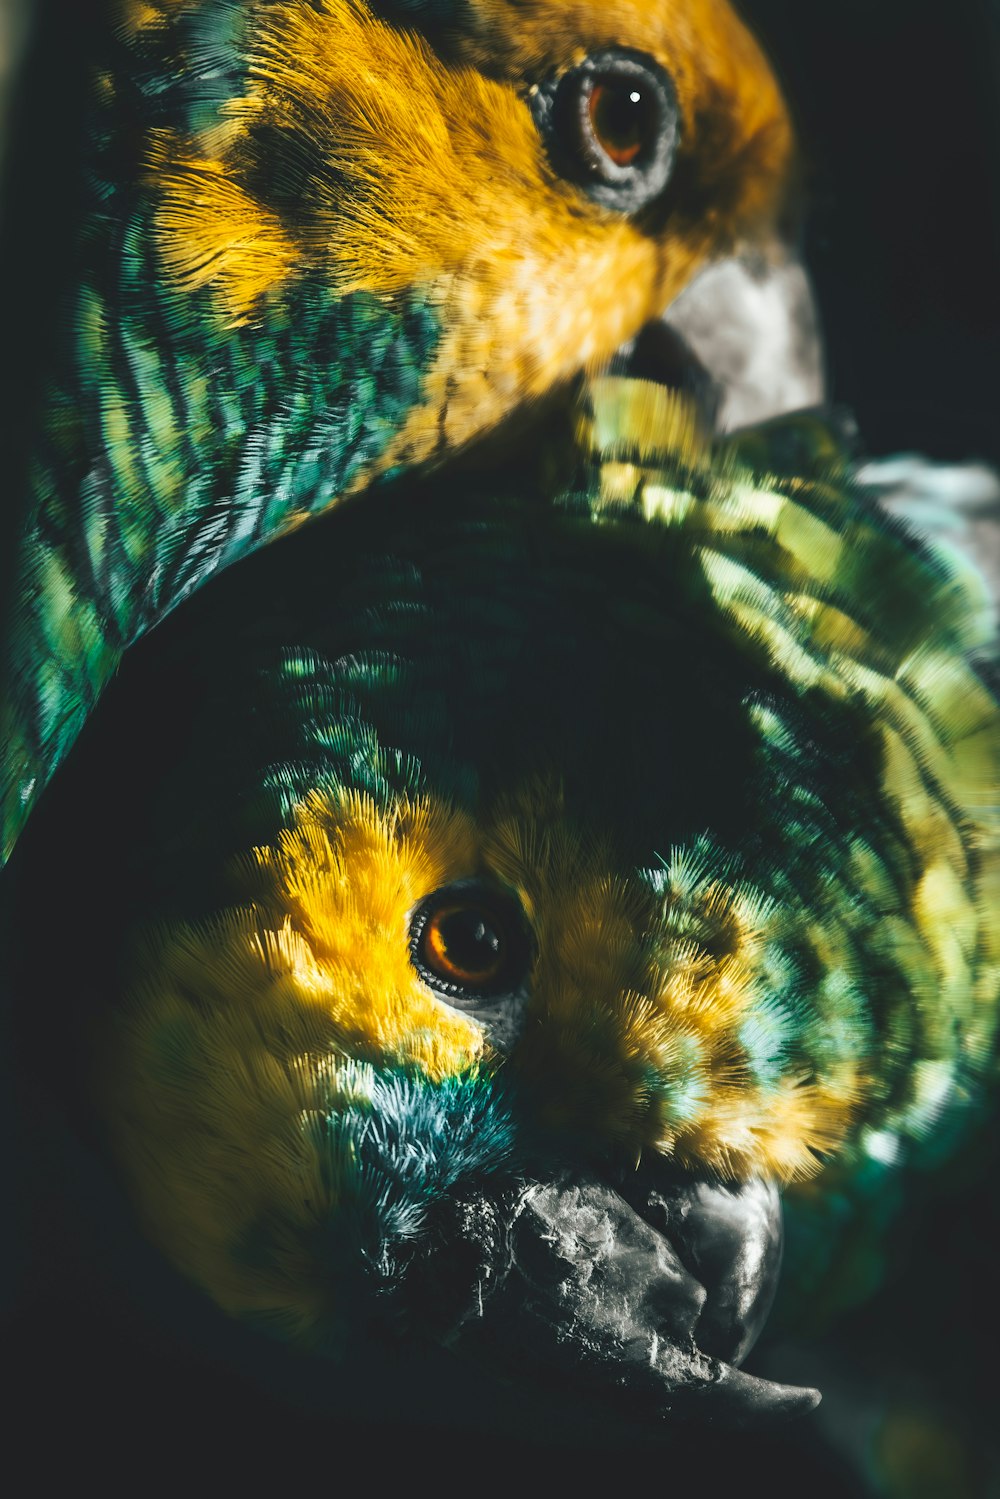 a close up of a bird with yellow and green feathers